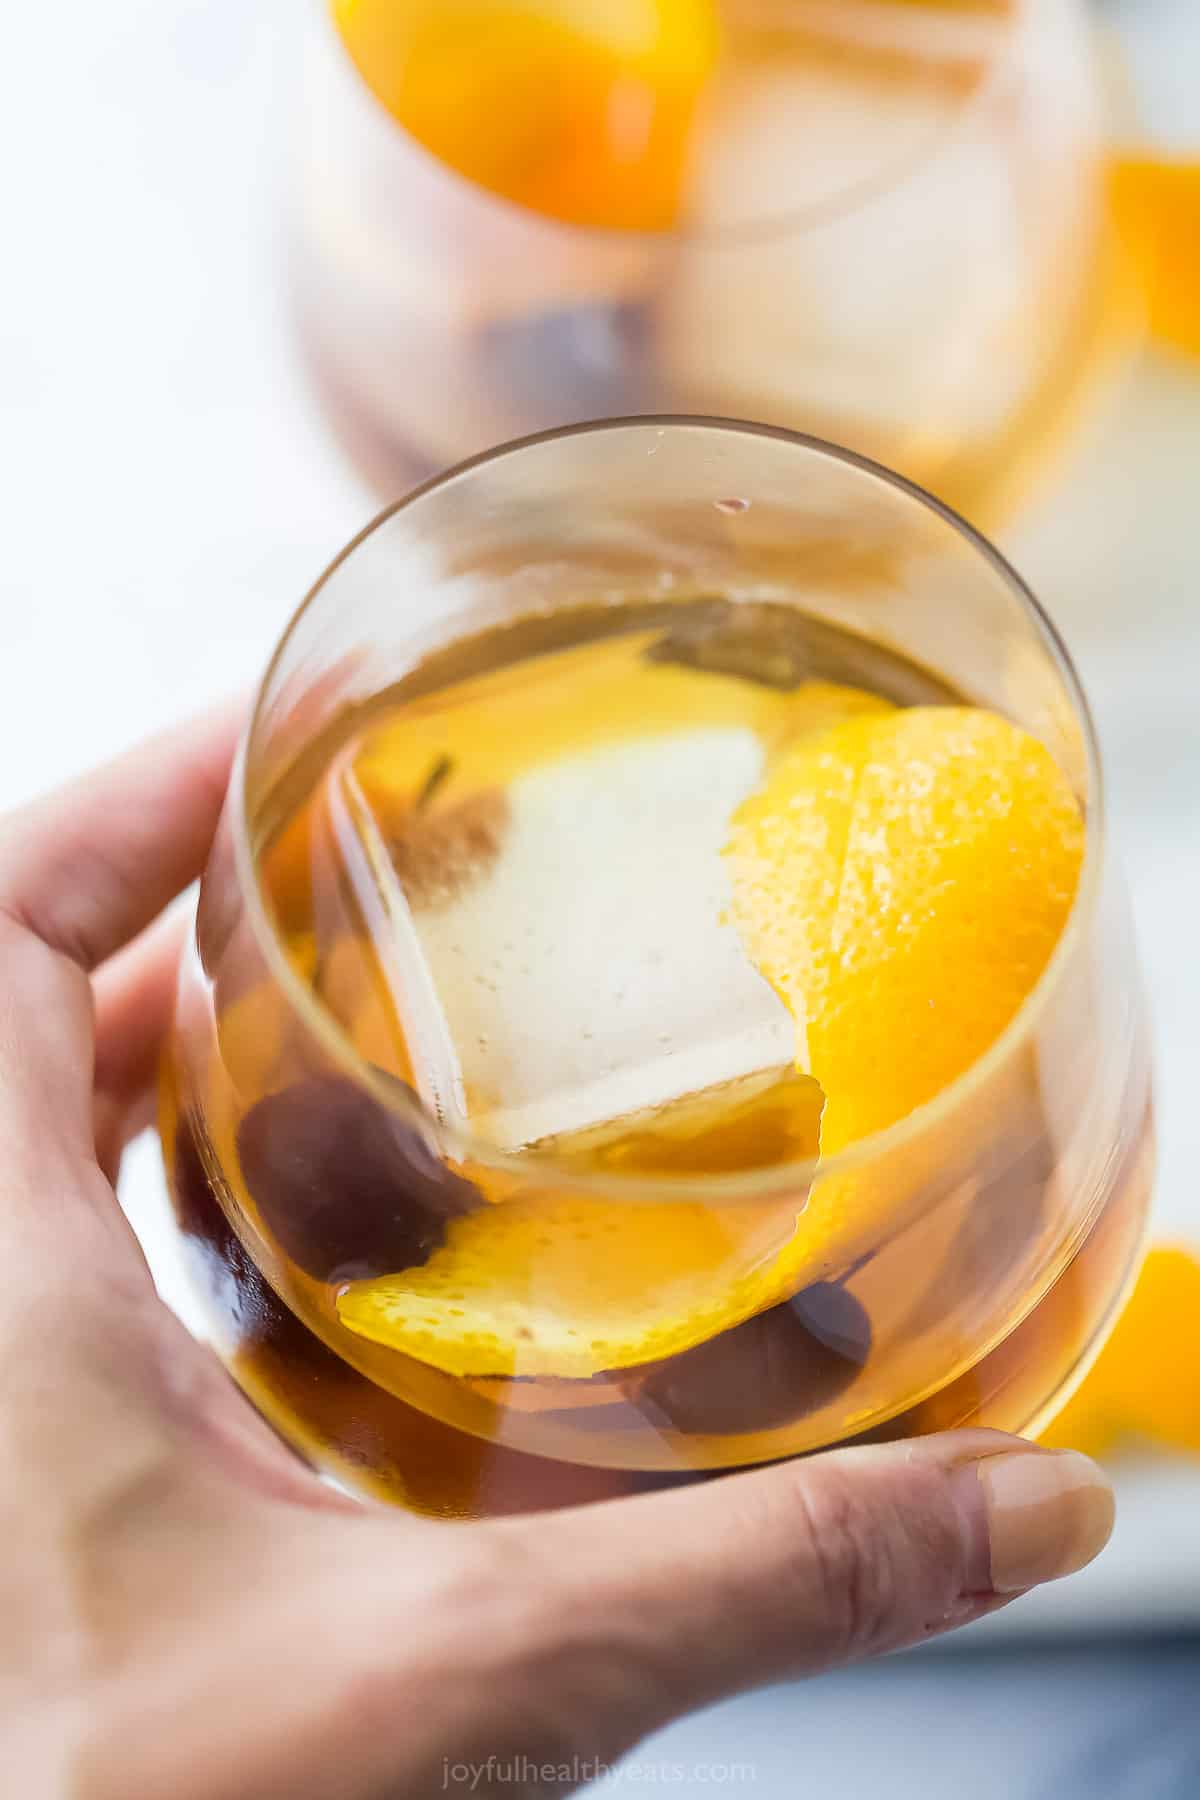 A hand holding a maple old fashioned in a tumbler glass with an ice cube